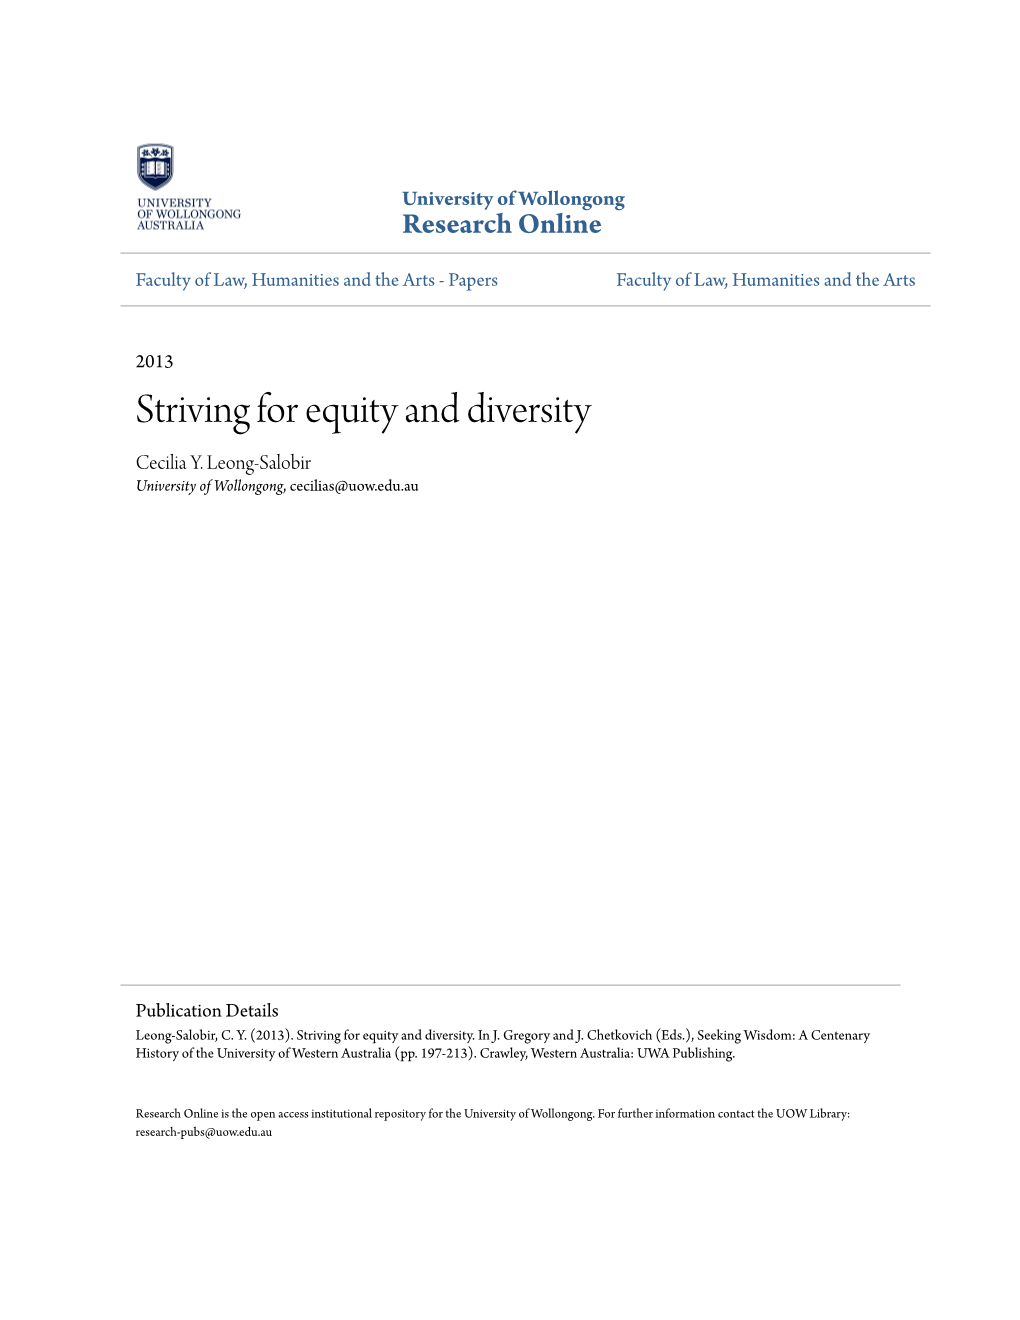 Striving for Equity and Diversity Cecilia Y